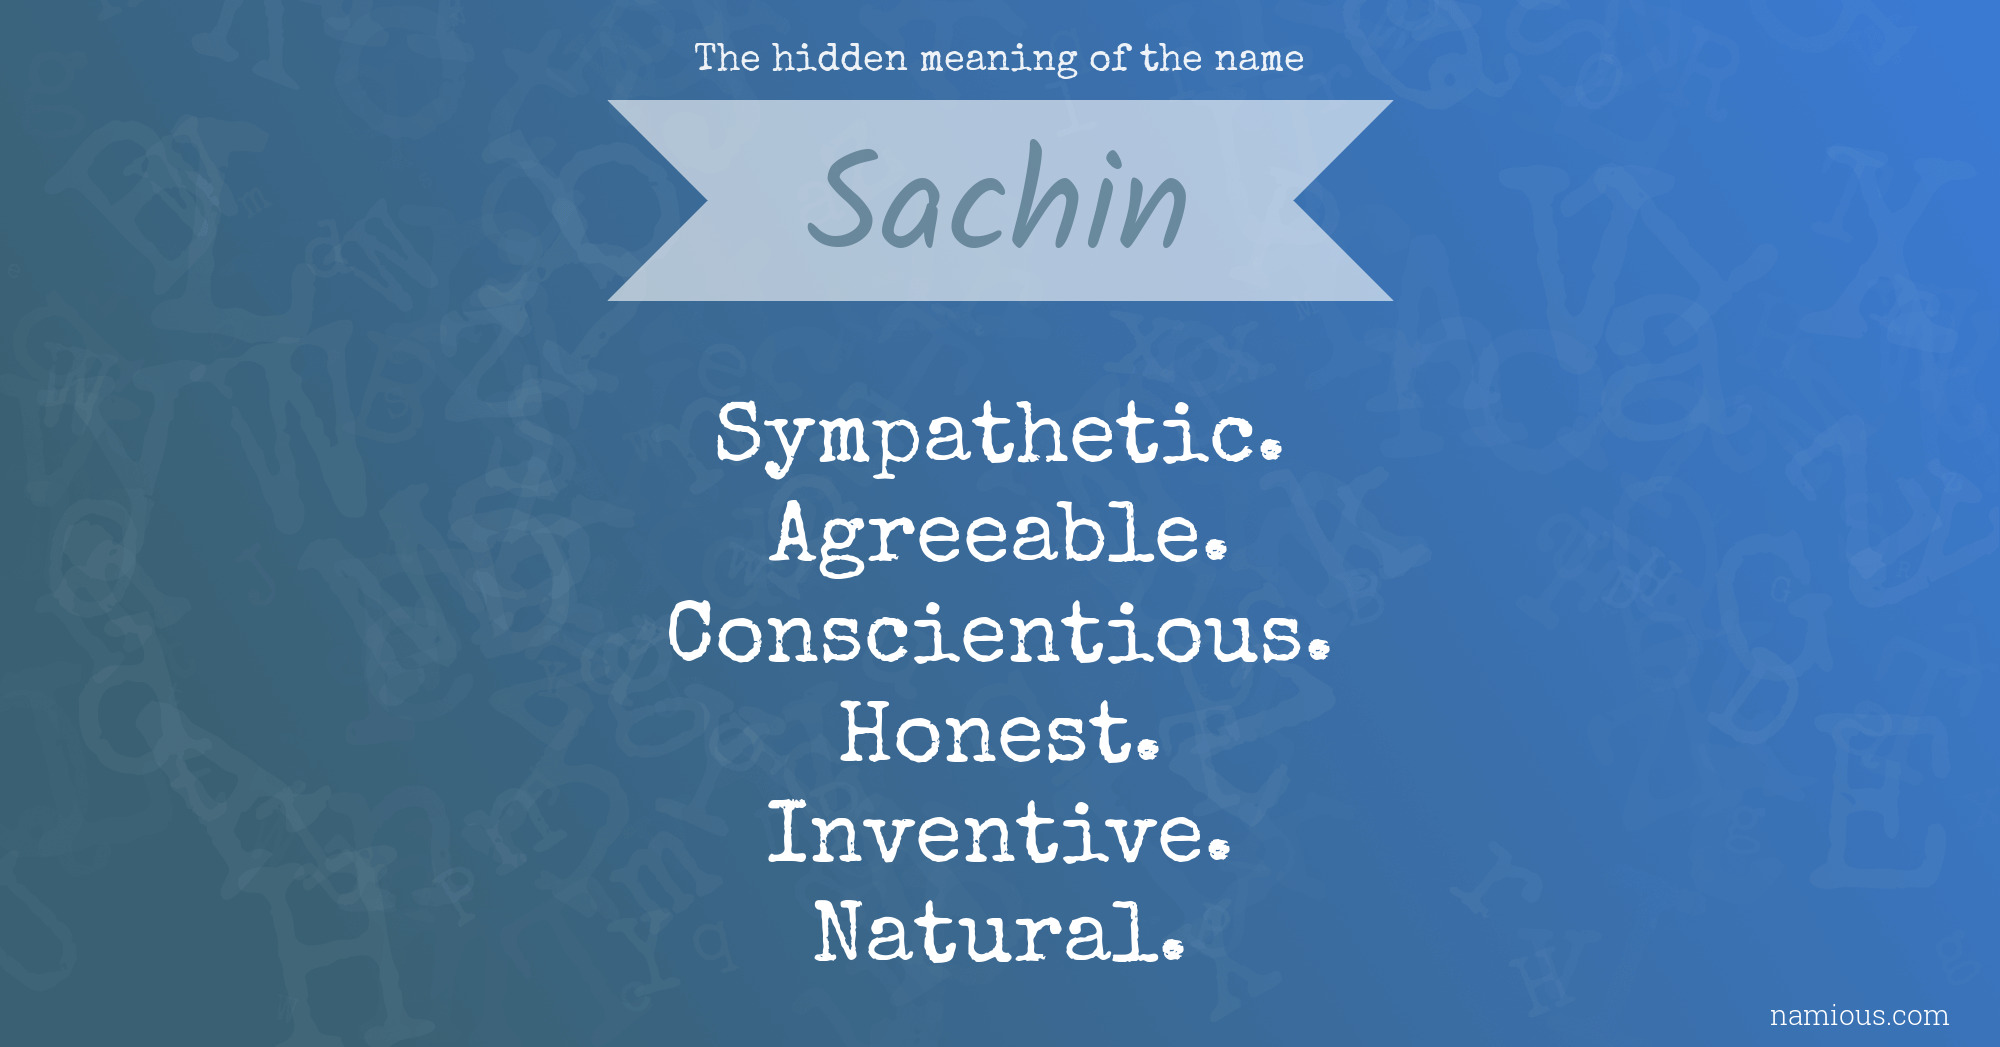 The hidden meaning of the name Sachin